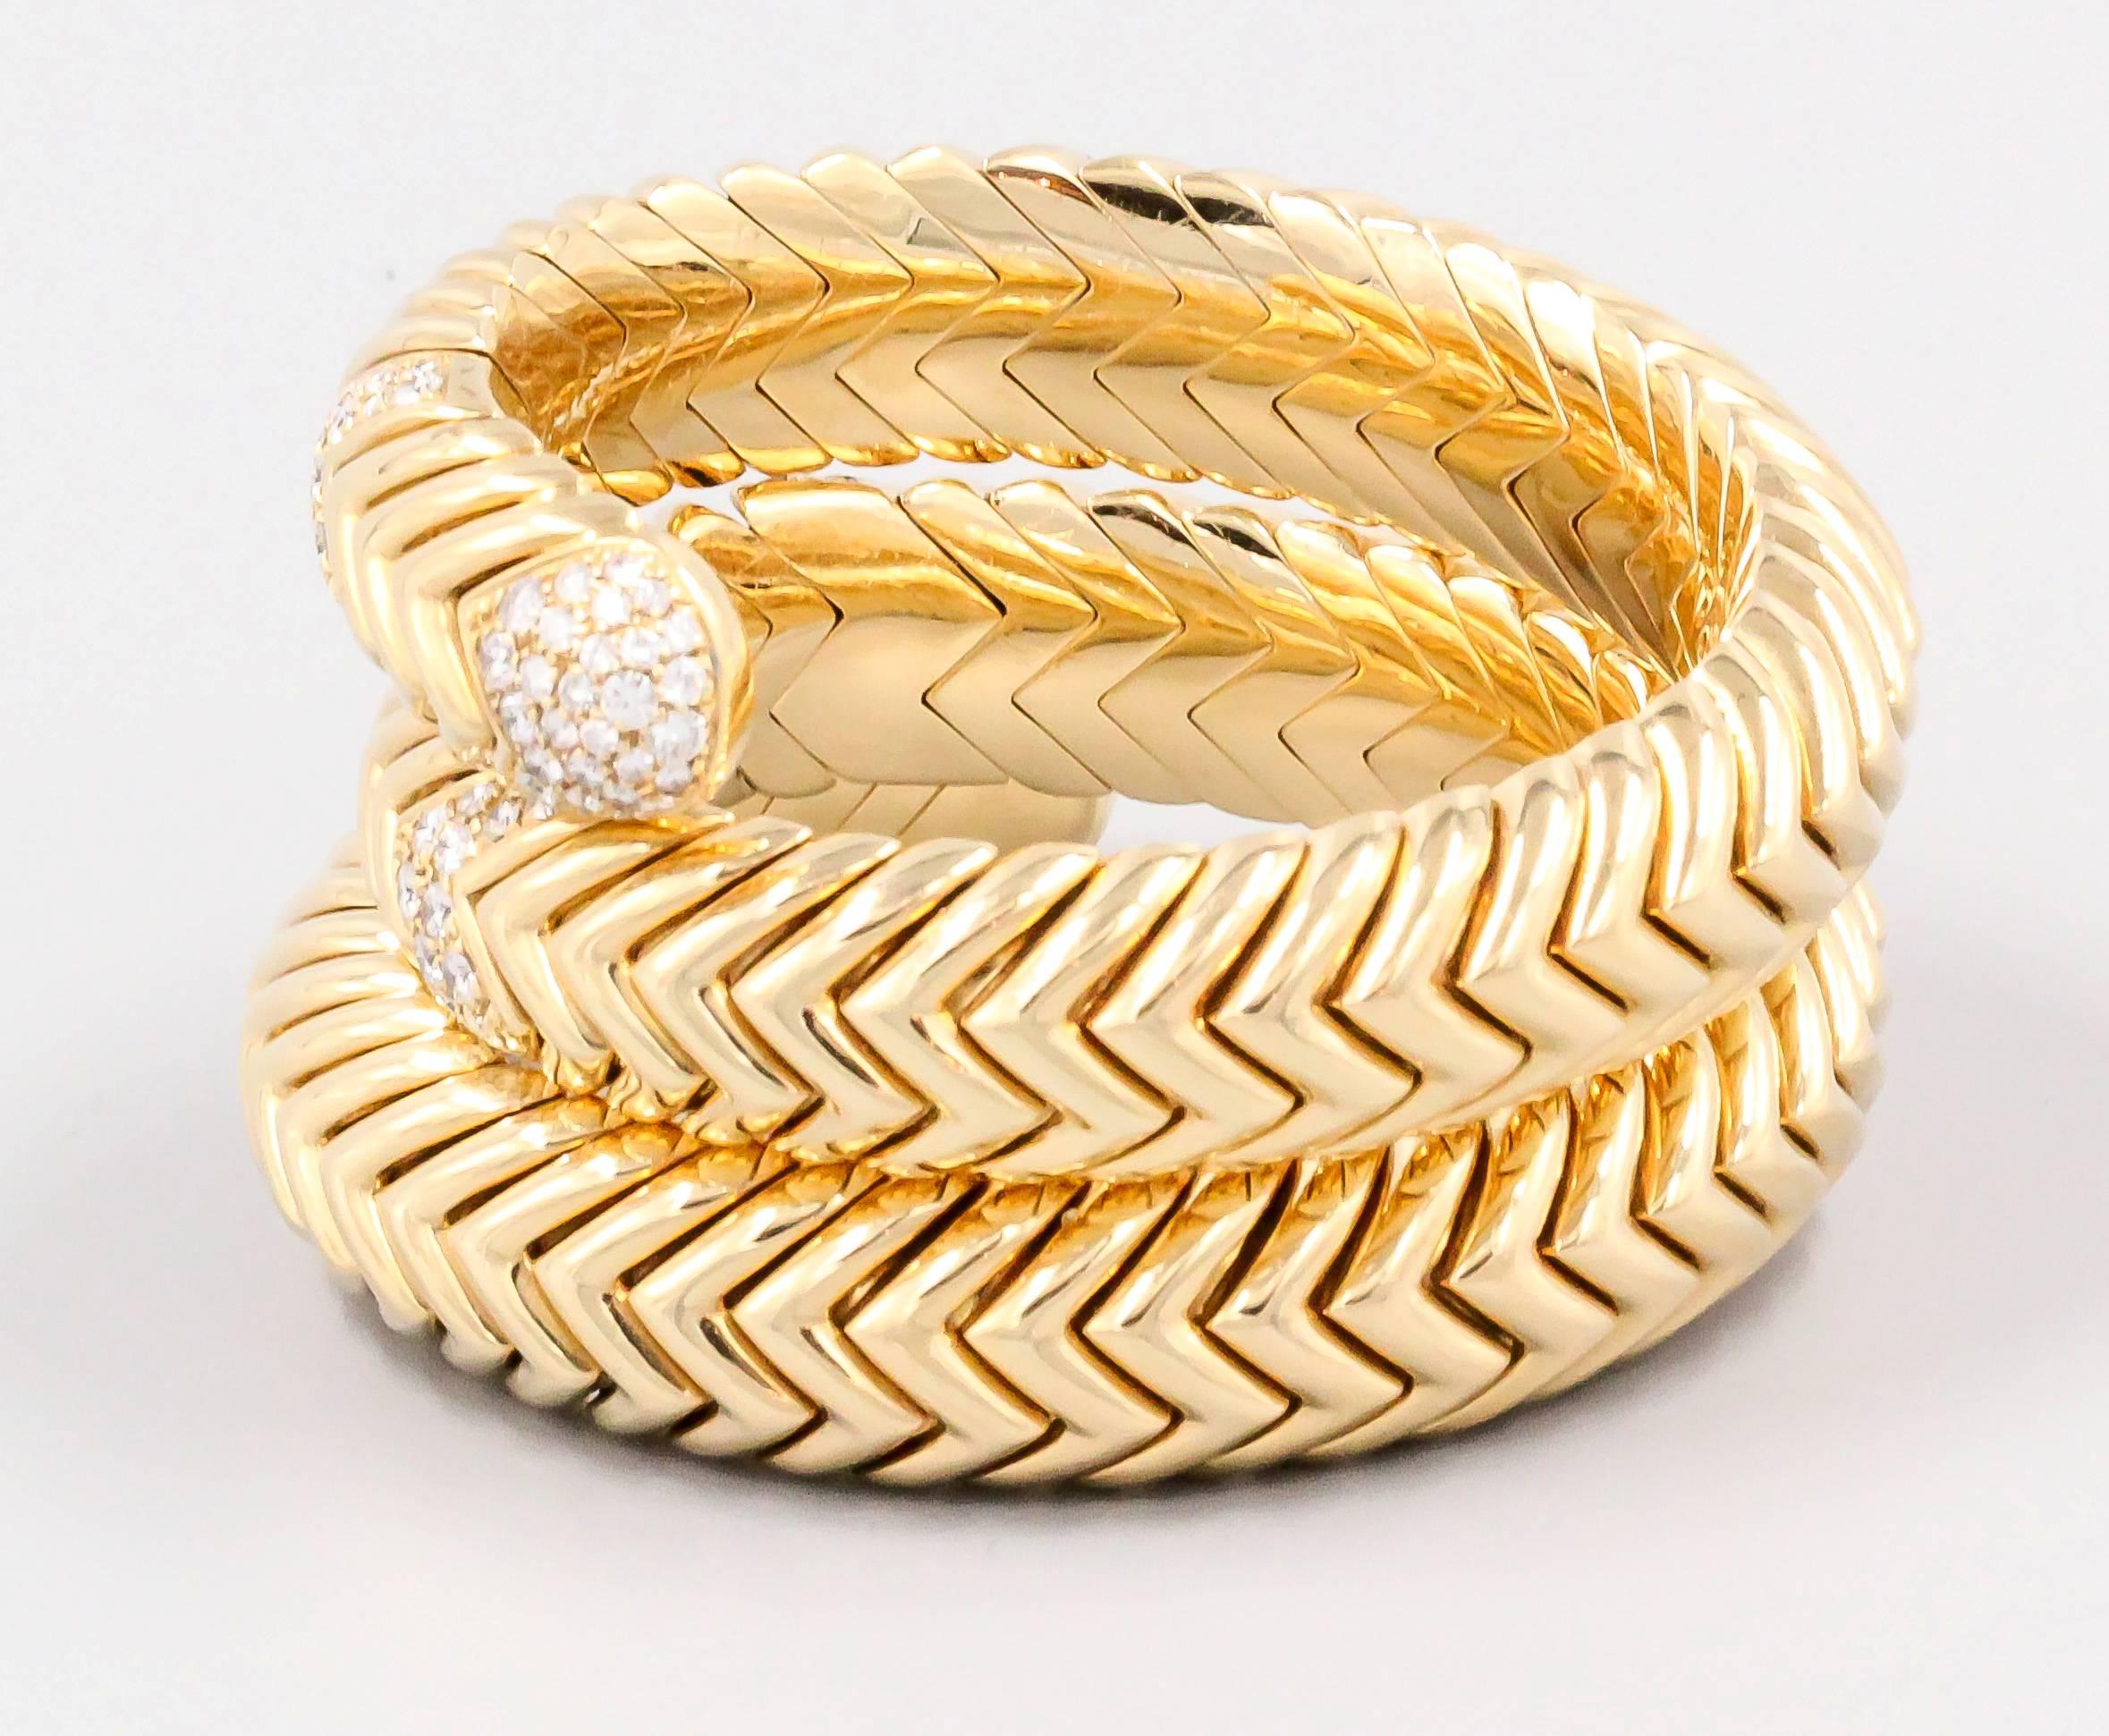 Timeless diamond and 18K yellow gold snake bracelet, from the "Spiga" collection by Bulgari. It features very high grade round brilliant cut diamonds of approx. 4.5 carats. Exquisite workmanship in this bracelet, which also features a